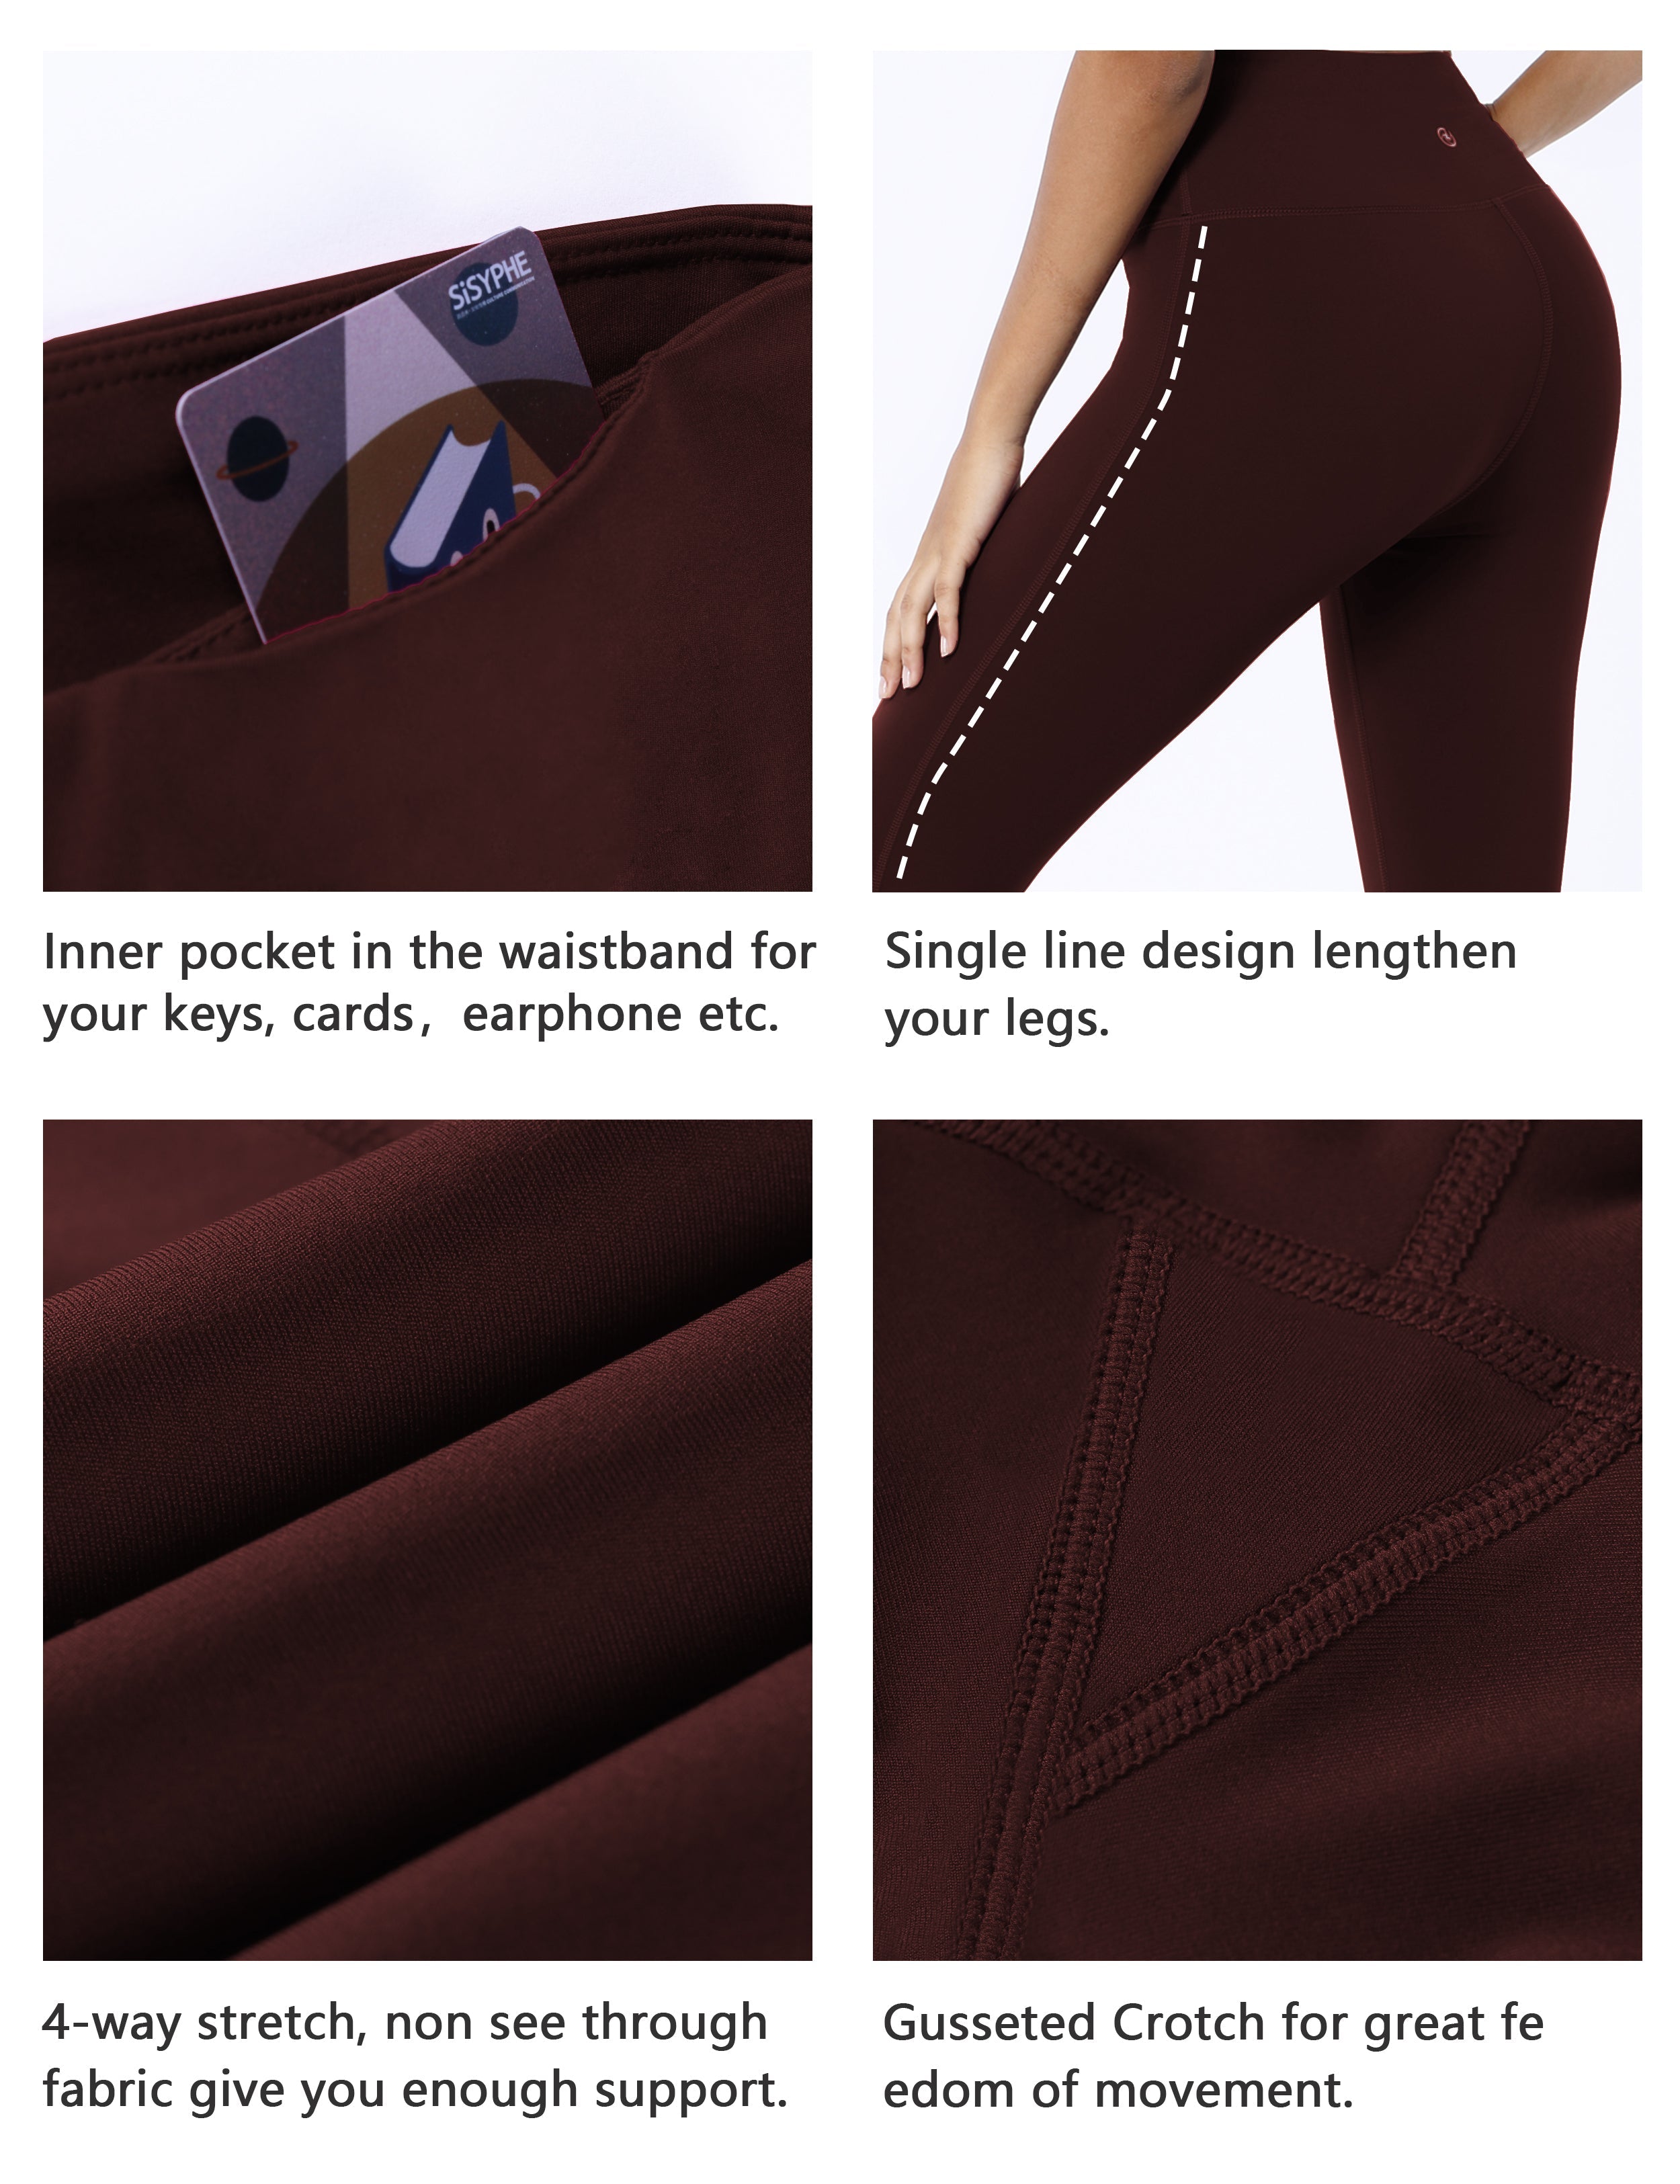 High Waist Side Line Yoga Pants mahoganymaroon Side Line is Make Your Legs Look Longer and Thinner 75%Nylon/25%Spandex Fabric doesn't attract lint easily 4-way stretch No see-through Moisture-wicking Tummy control Inner pocket Two lengths